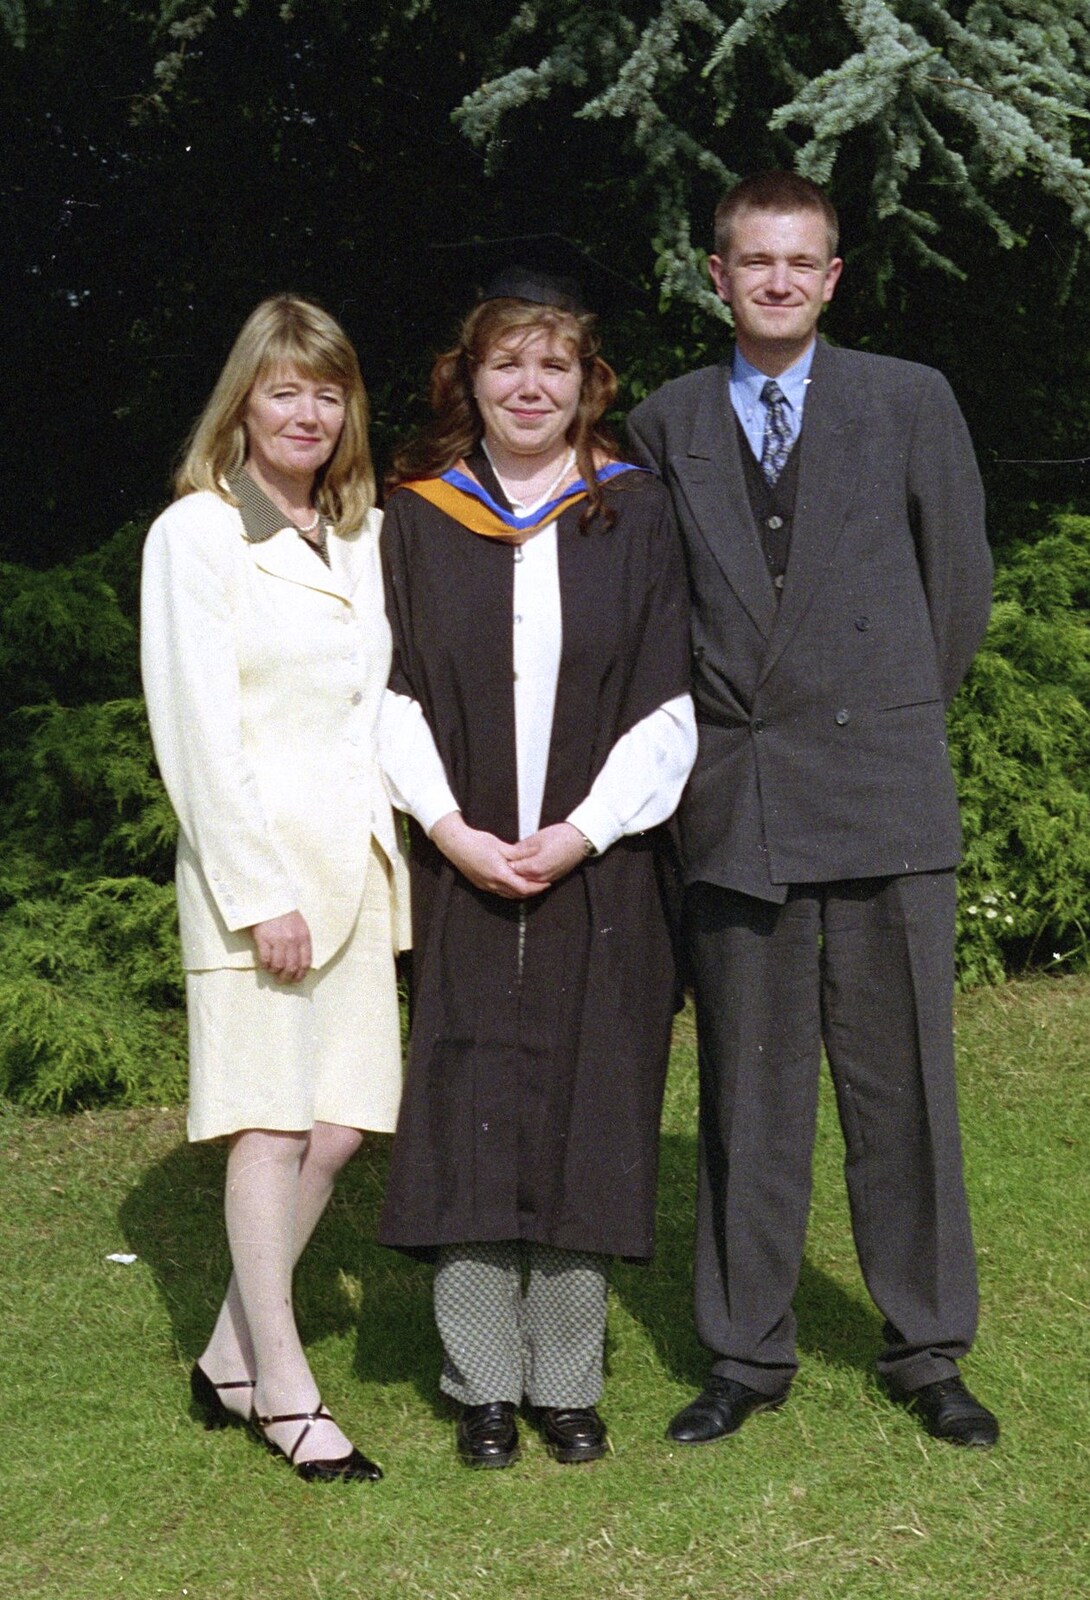 Sis Graduates from De Montfort, Leicester, Leicestershire - 9th August 1997: Mother, Sis and Nosher